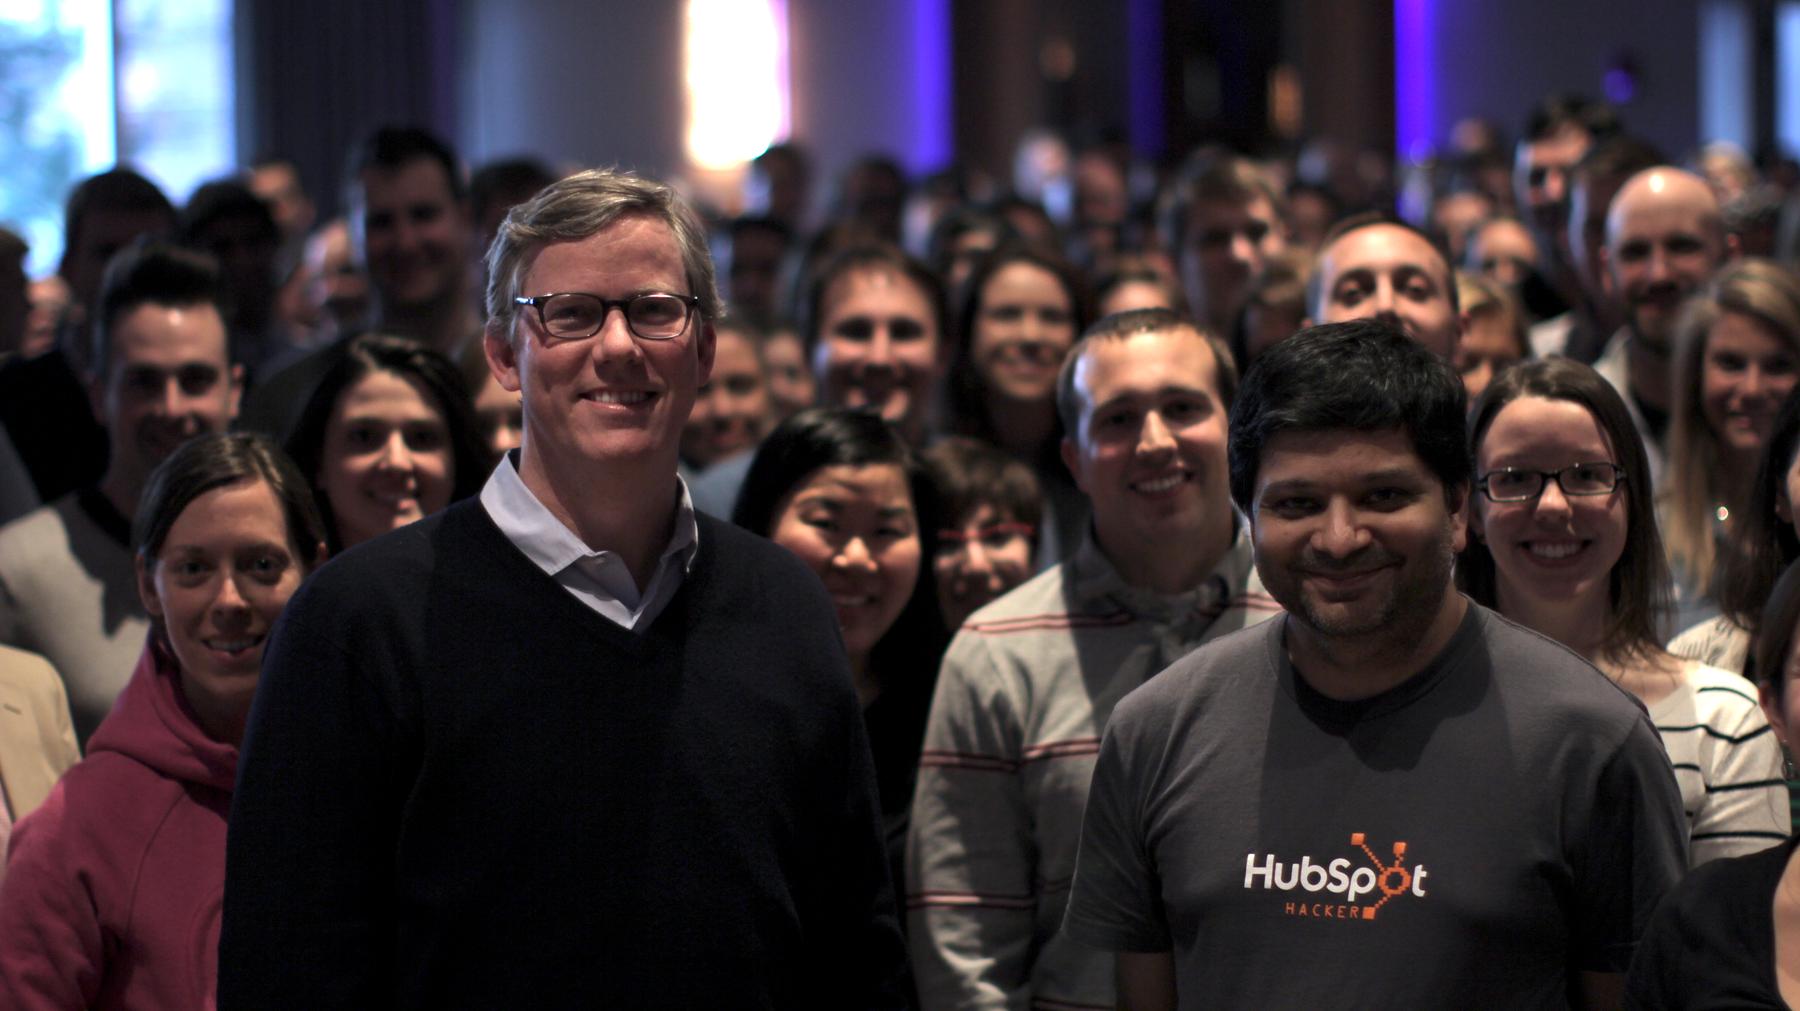 File:HubSpot Group Photo.jpg - a group of people standing in a crowd of people